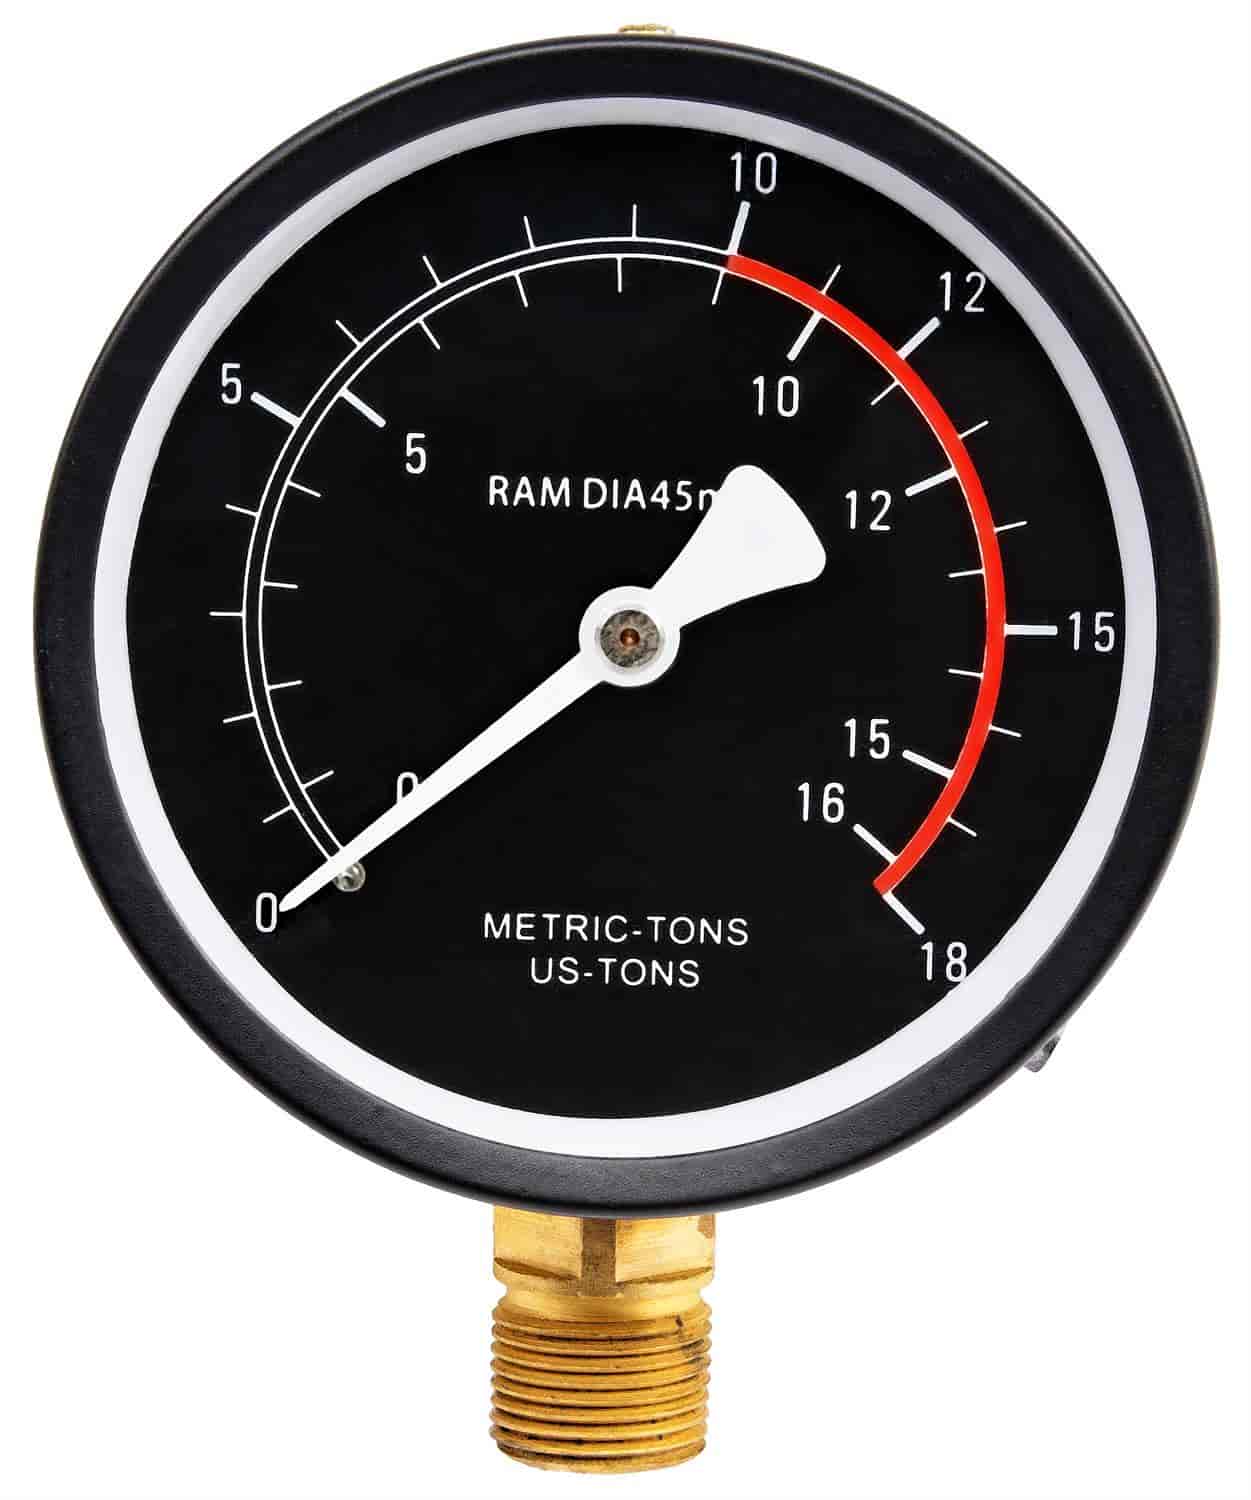 Replacement Pressure Gauge For 10-Ton Hydraulic Shop Press with Pressure Gauge 555-81636